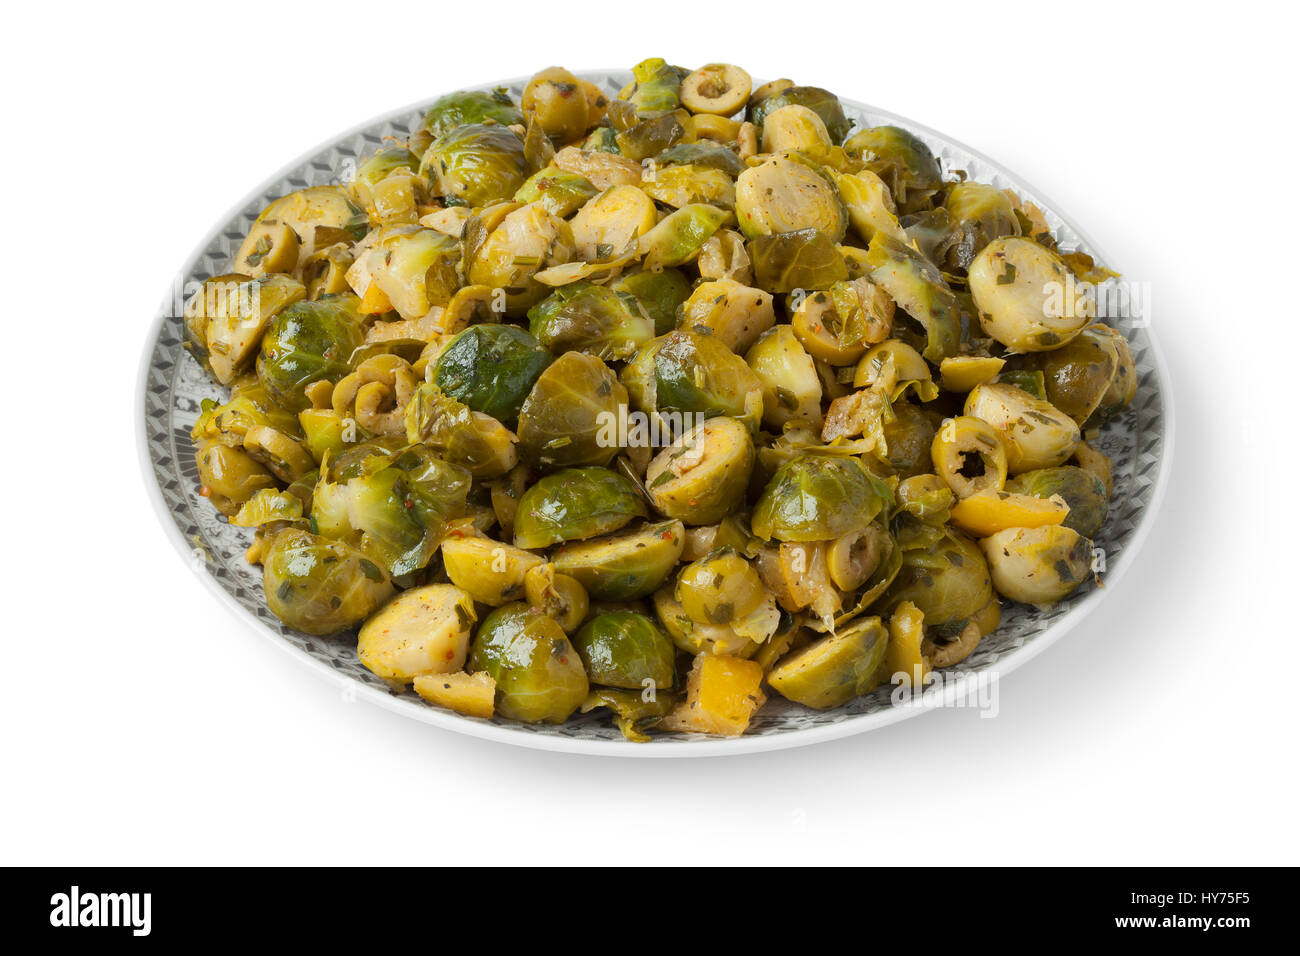 Moroccan dish with Brussels sprouts and preserved lemon on white background Stock Photo